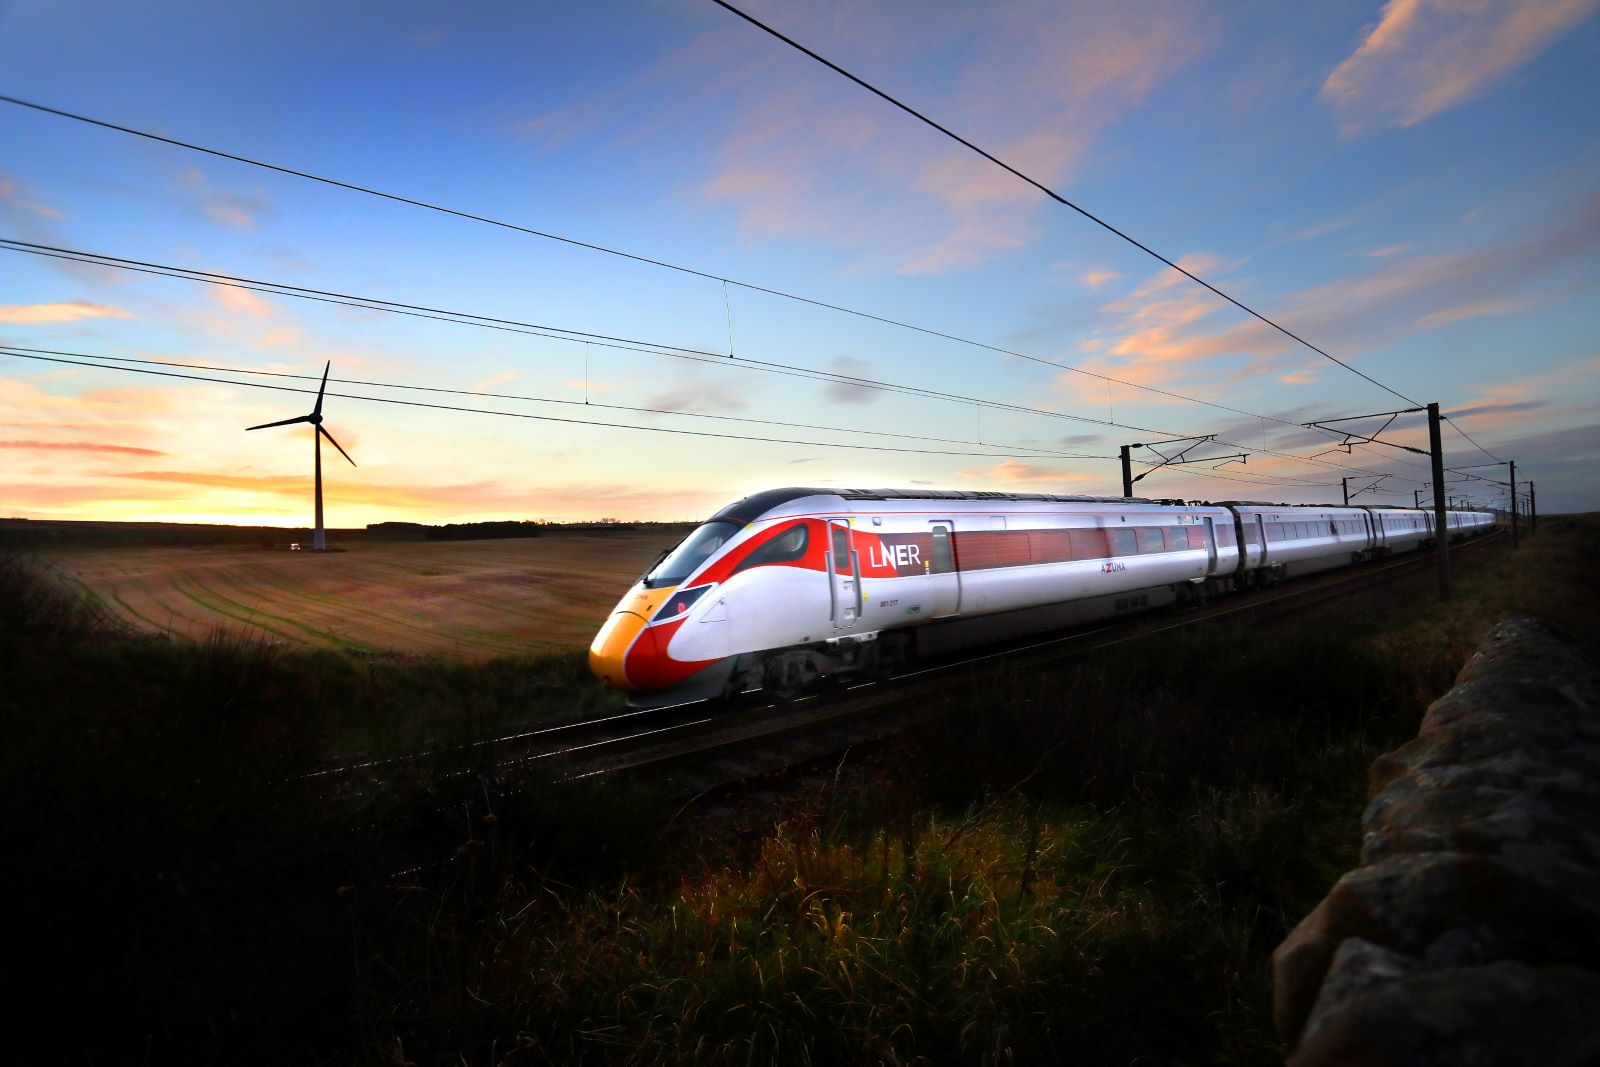 Eco-Friendly Rail Travel Focus For Inspiring New Poster Competition